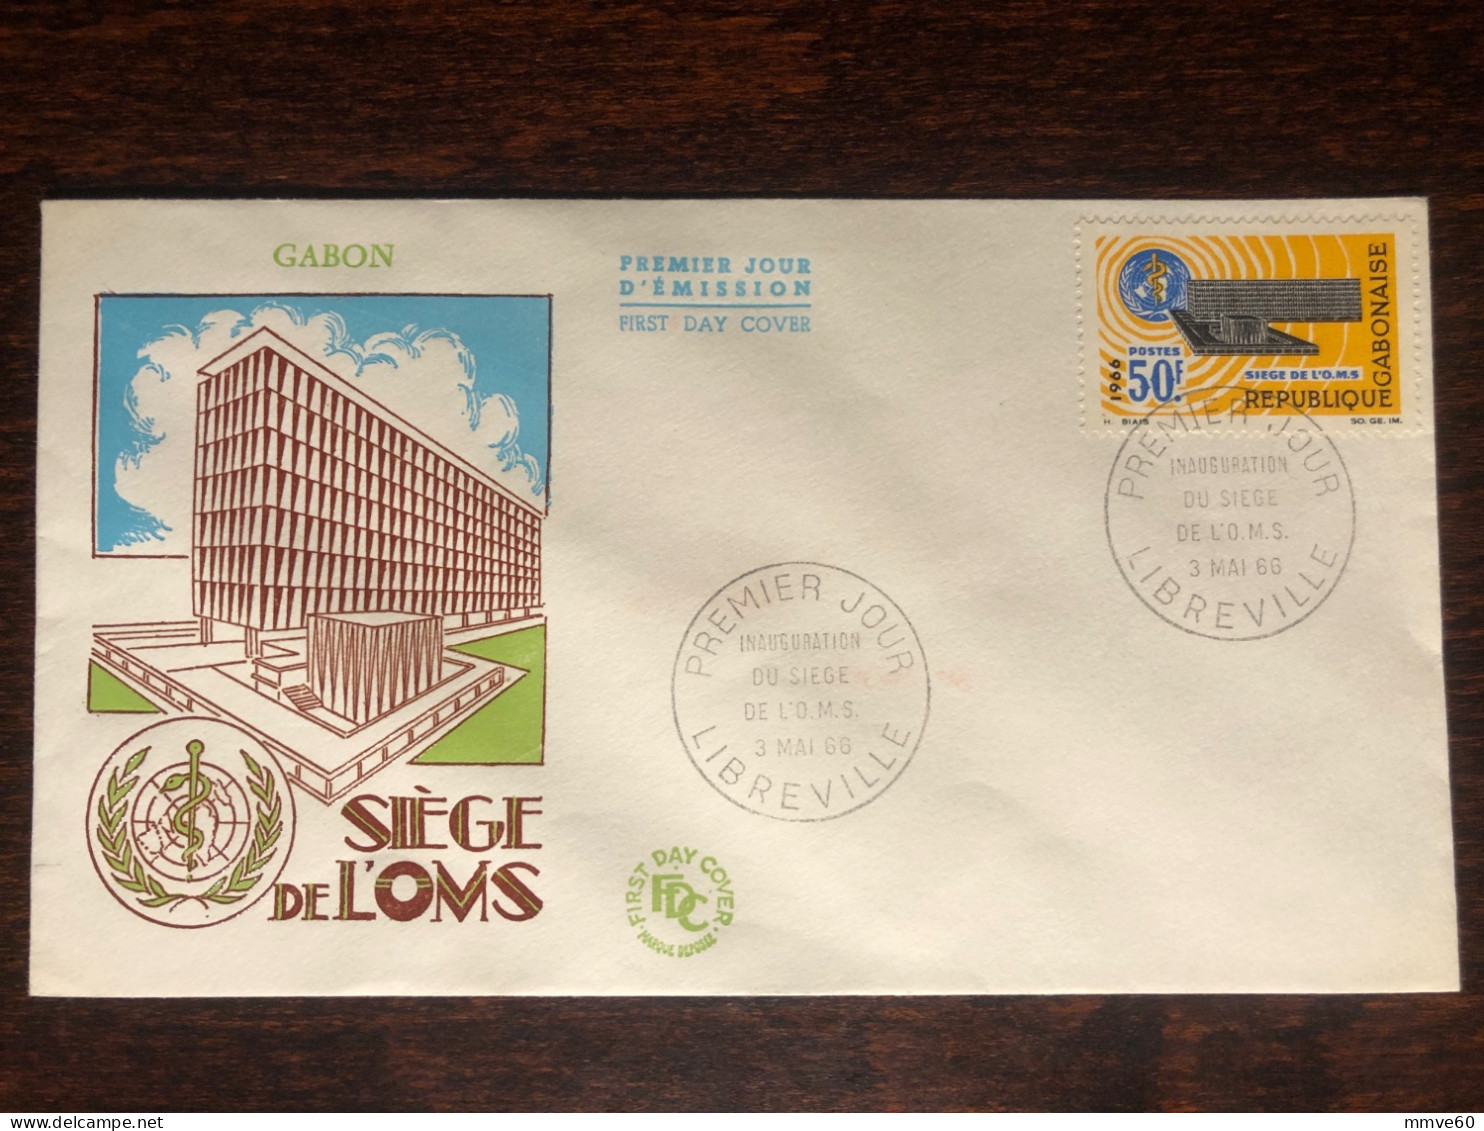 GABON FDC COVER 1966 YEAR WHO OMS  HEALTH MEDICINE STAMPS - Gabon